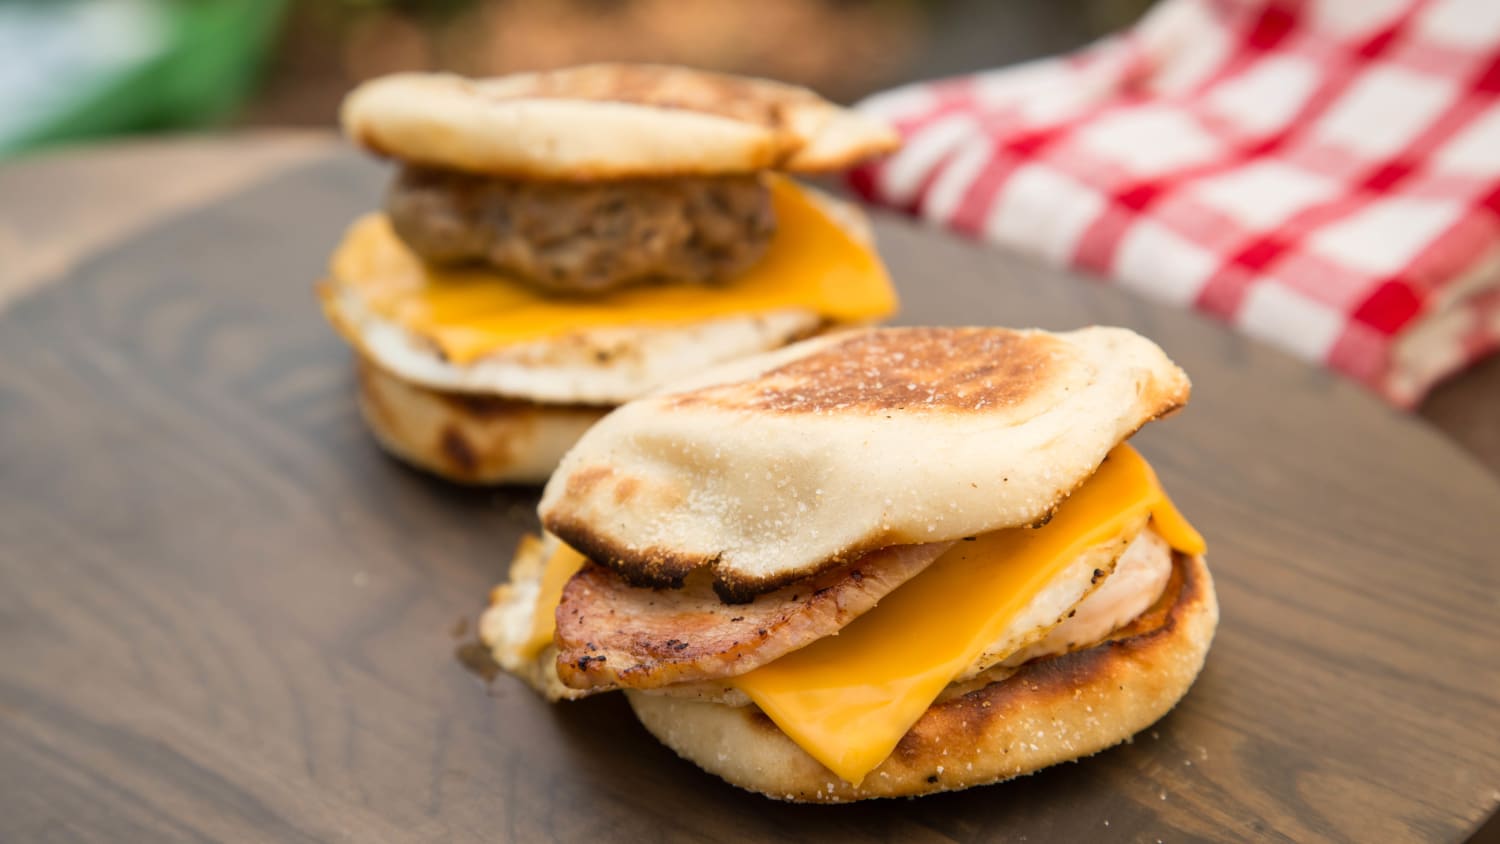 https://media-cldnry.s-nbcnews.com/image/upload/newscms/2015_31/706661/grilled-egg-mcmuffins-tease-today-150730.jpg